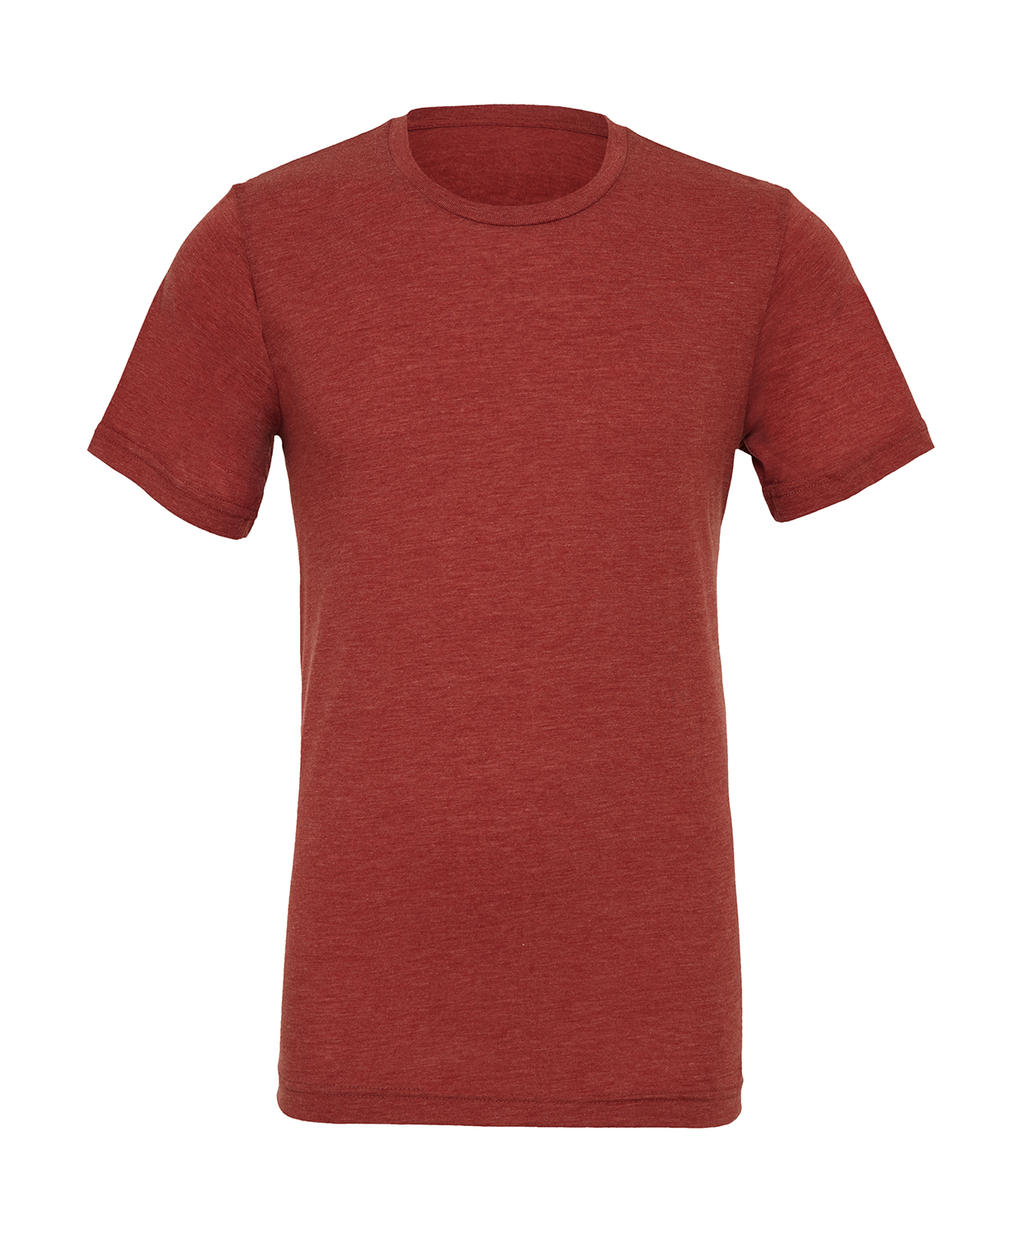  Unisex Triblend Short Sleeve Tee in Farbe Clay Triblend